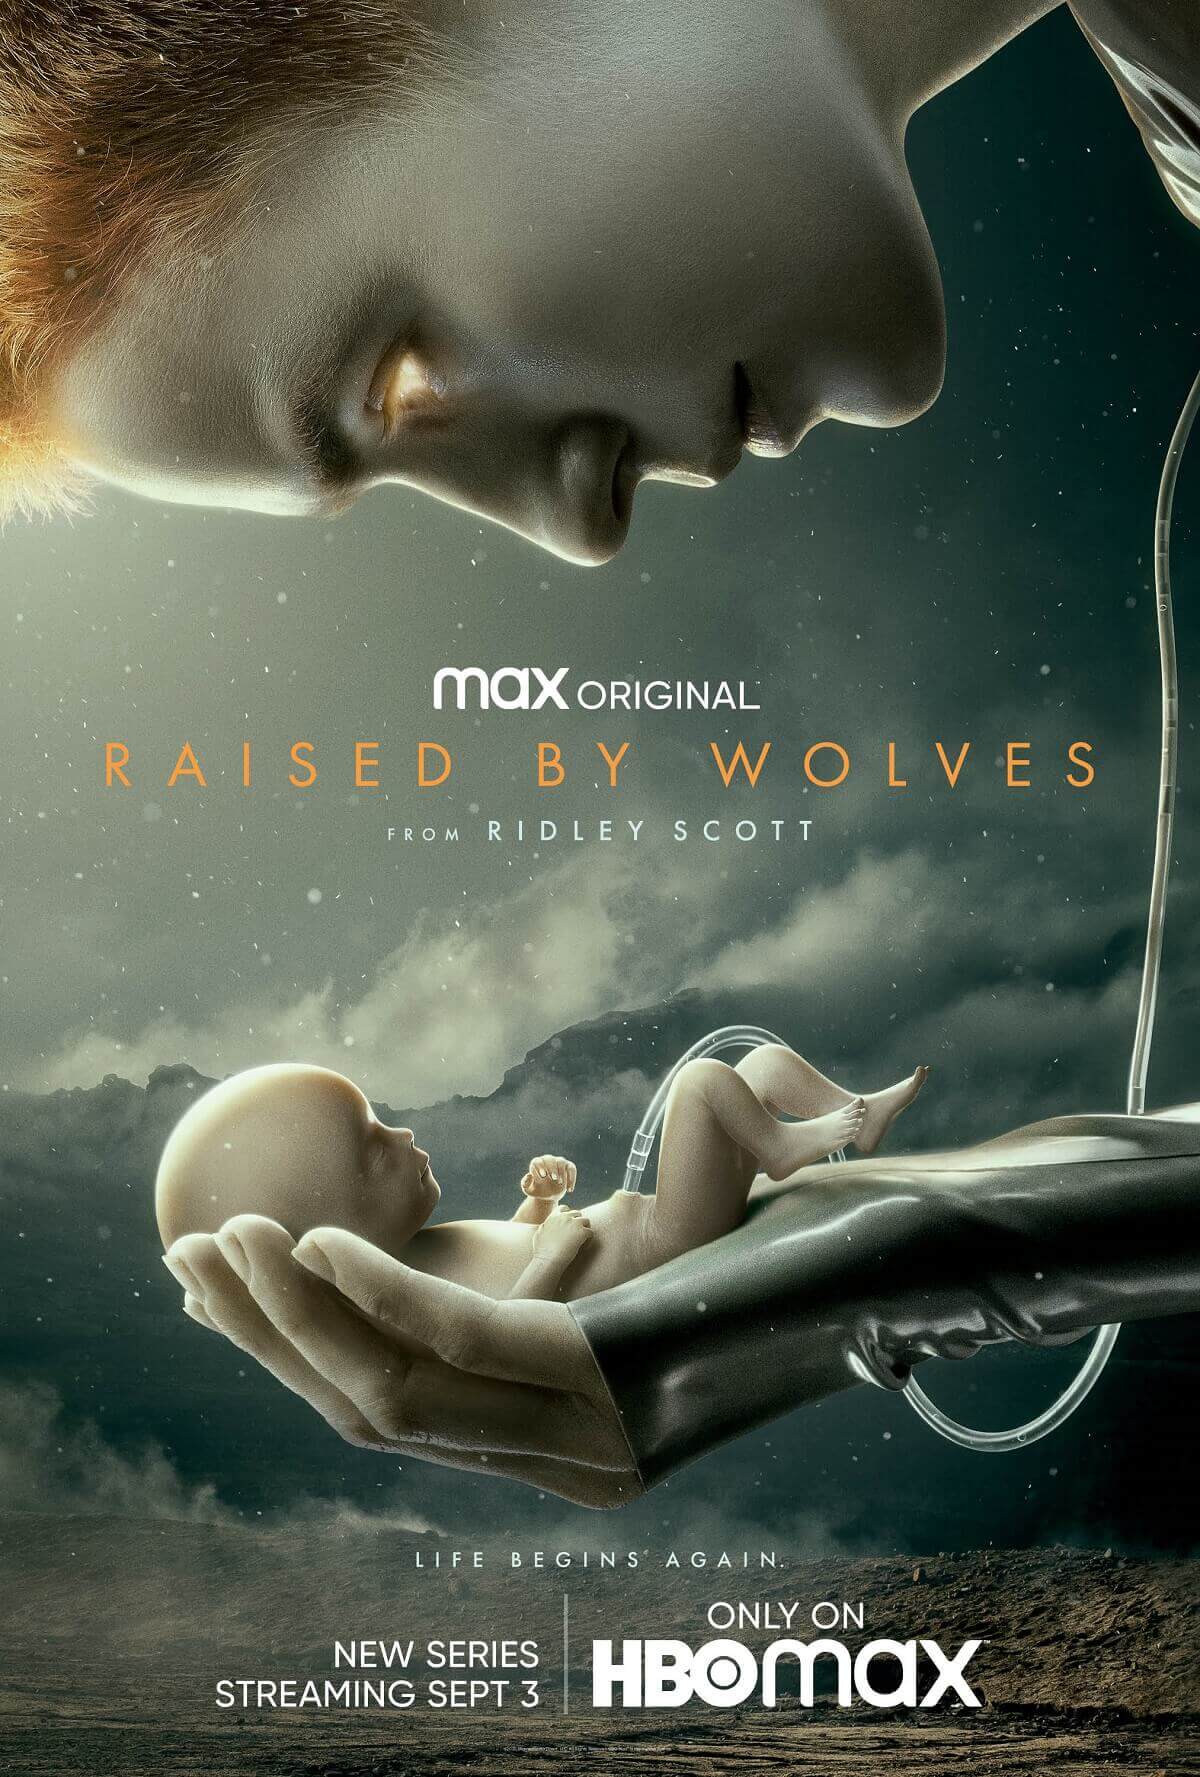 'Raised by Wolves' Releases an Official Trailer and Poster